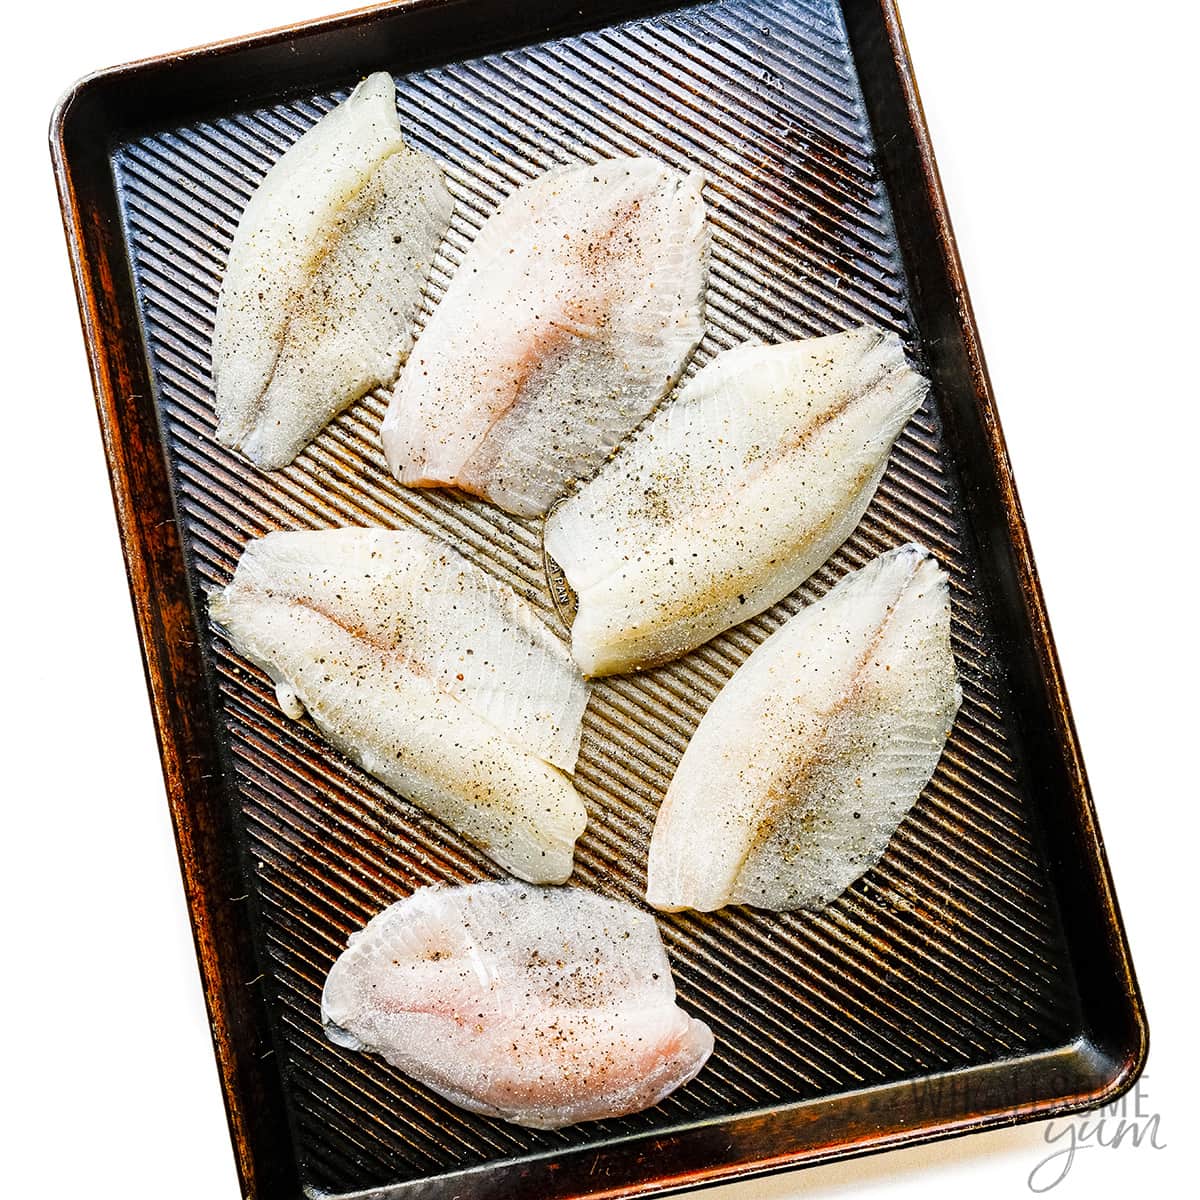 Tilapia fillets seasoned with salt and pepper.